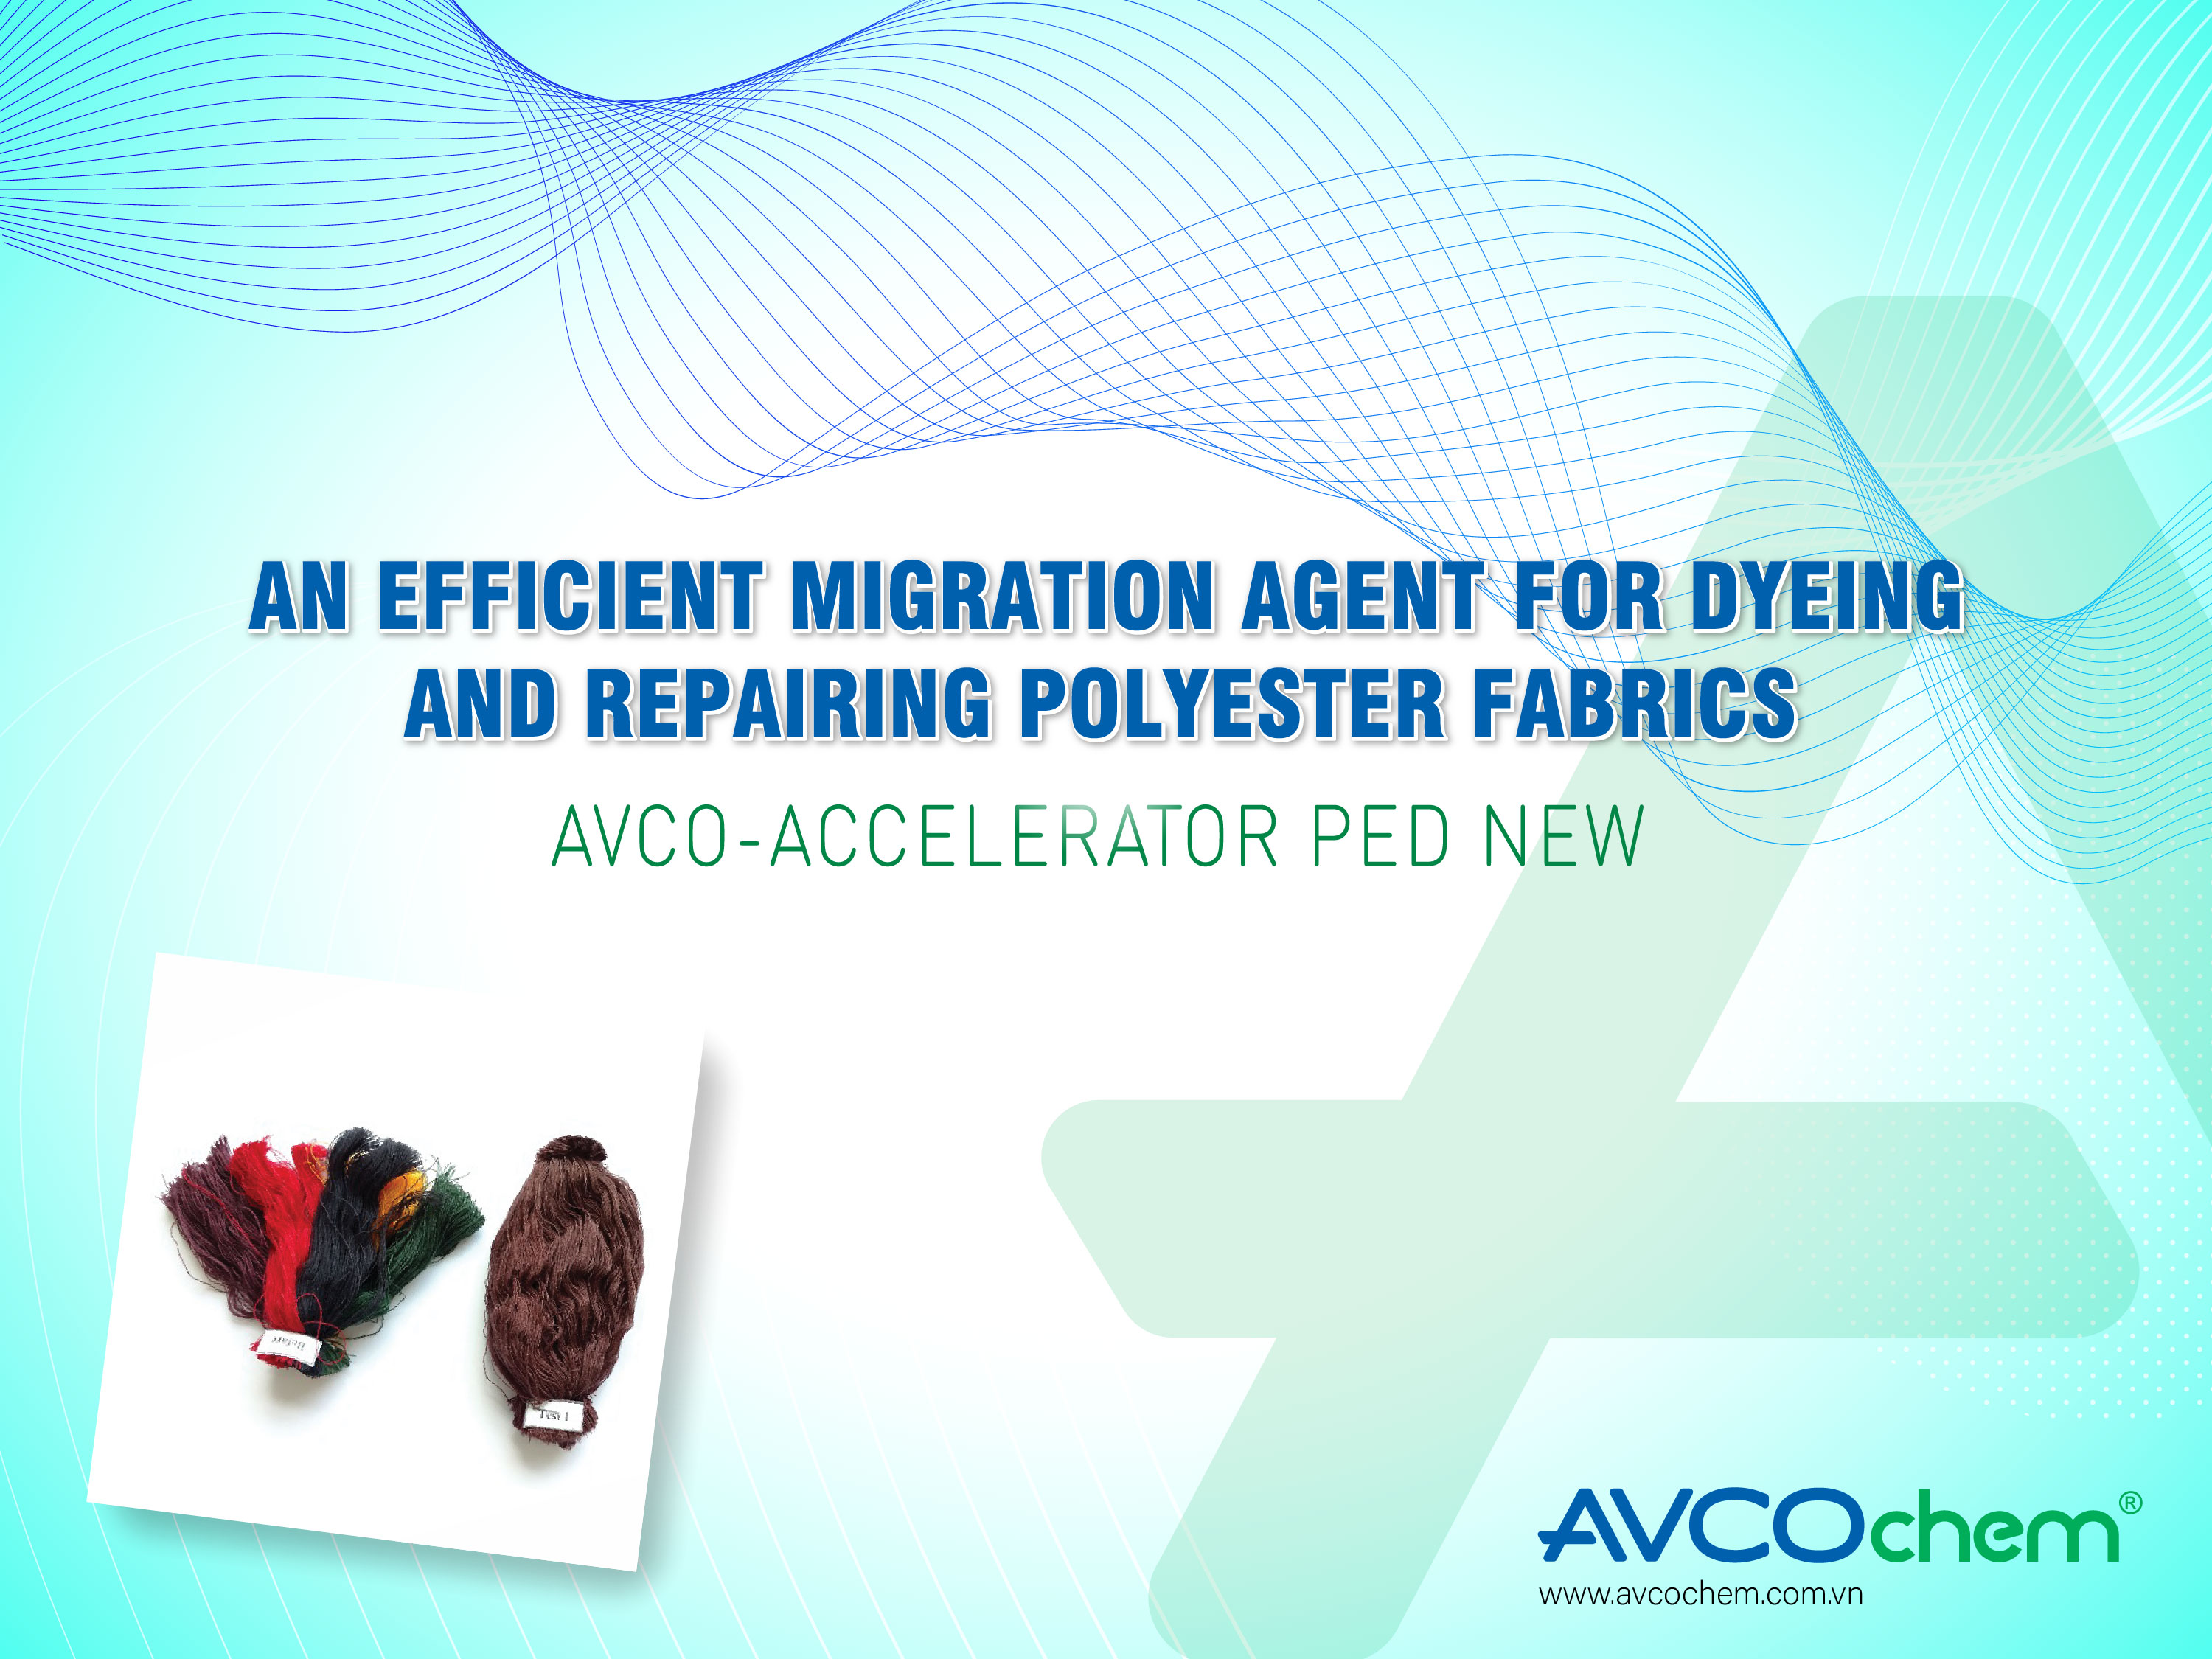 AN EFFICIENT MIGRATION AGENT FOR DYEING AND REPAIRING POLYESTER FABRICS